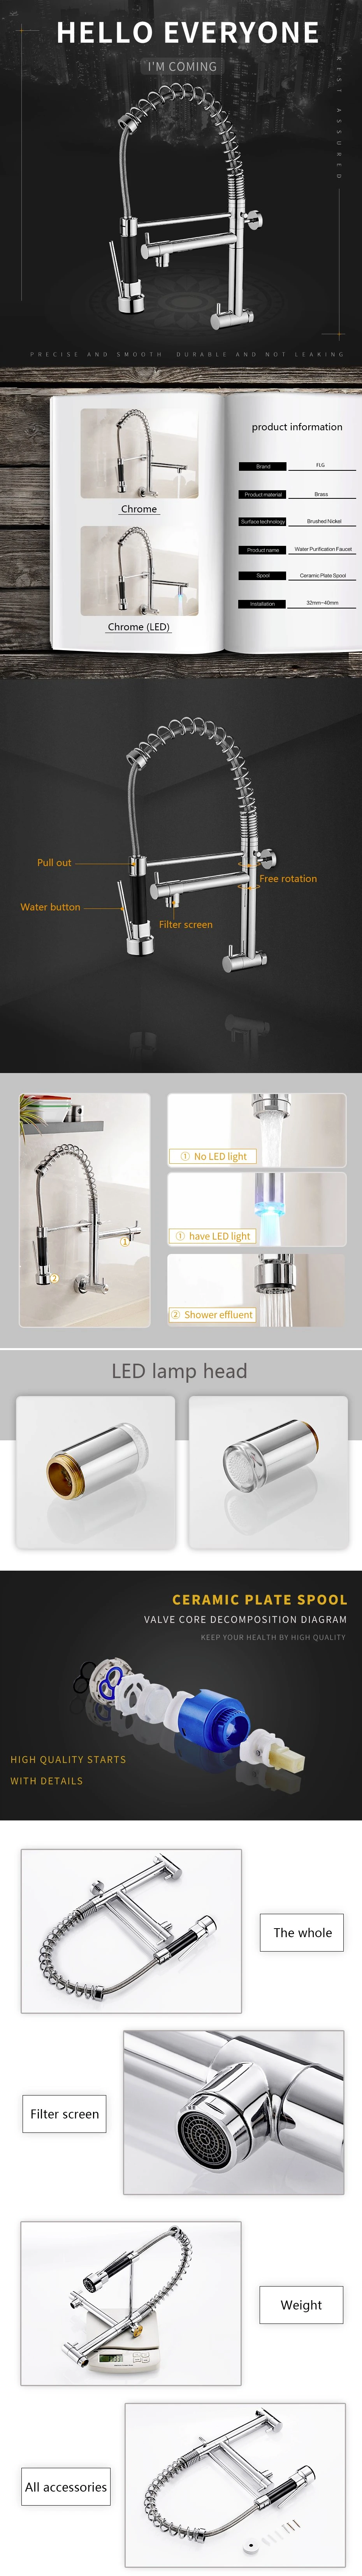 Flg LED Light Function Spray Chromed in Wall Mounted Kitchen Faucet